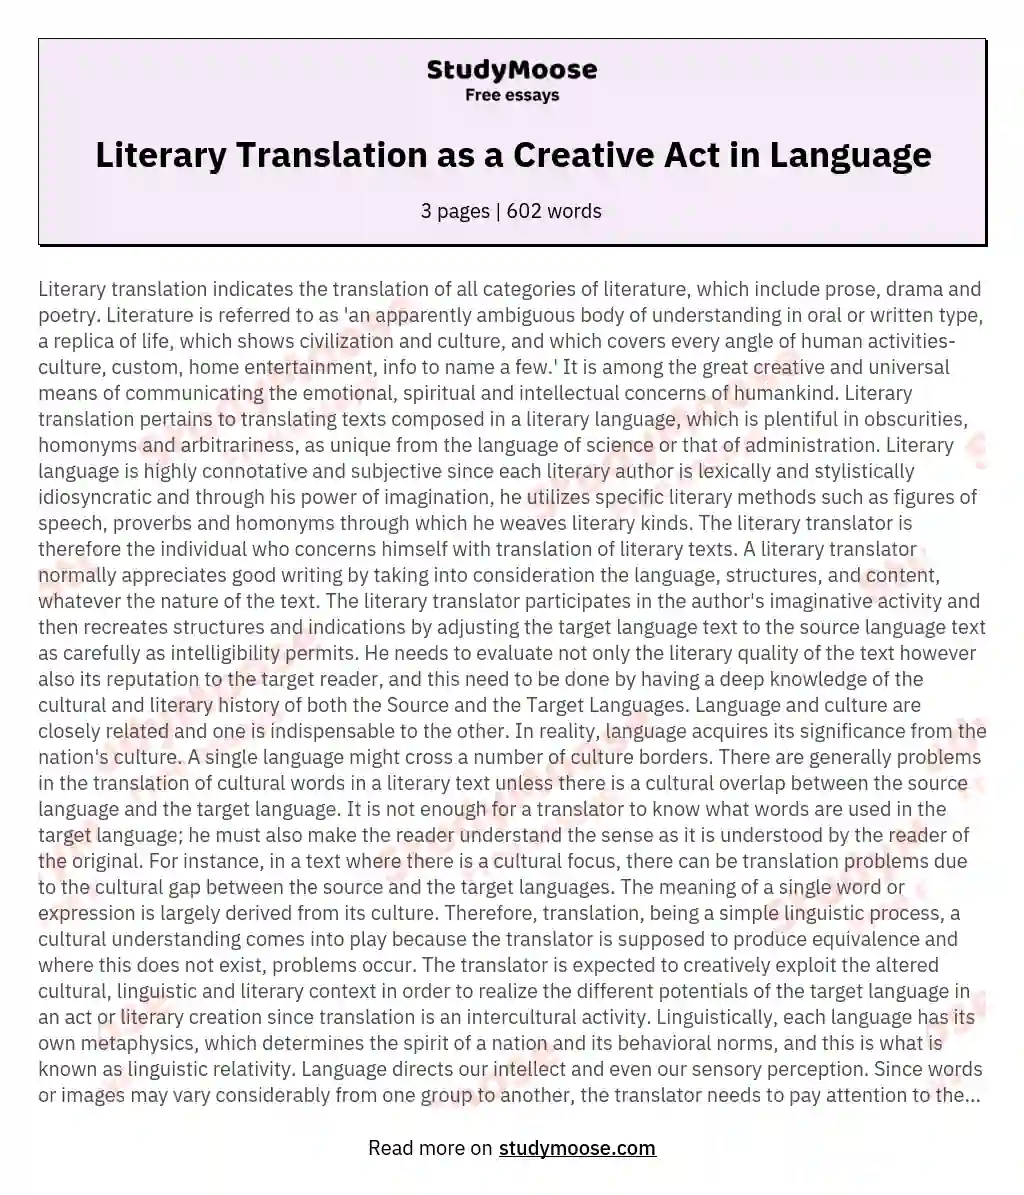 Literary Translation as a Creative Act in Language essay